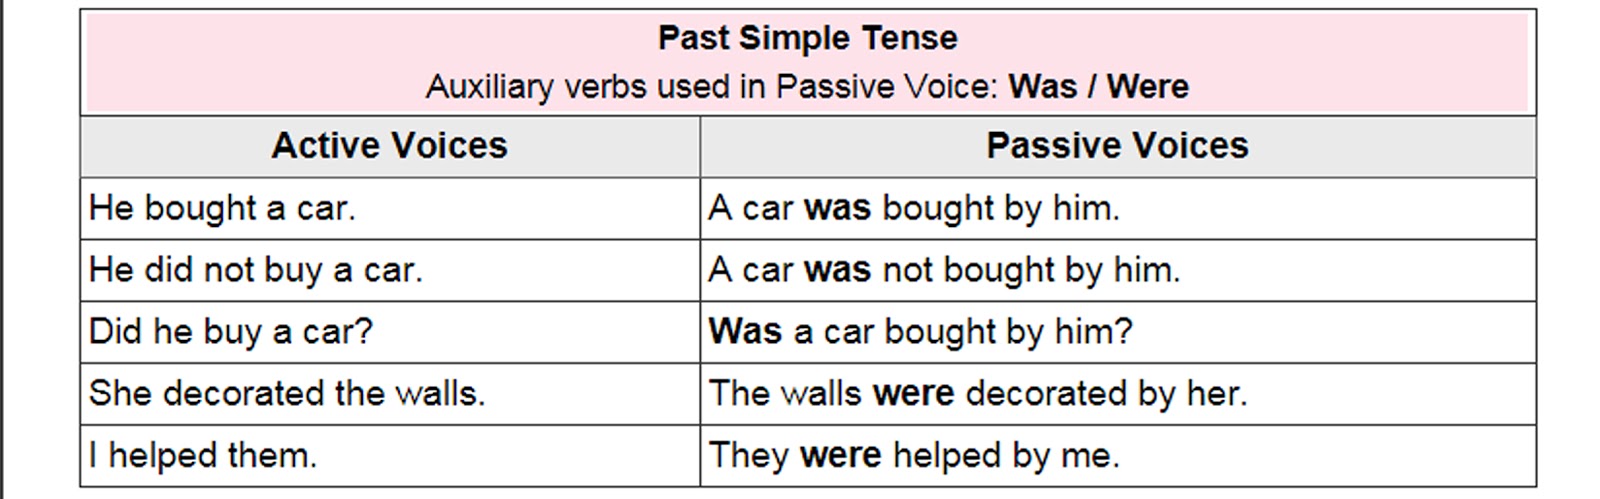 active-and-passive-voice-rules-past-indefinite-tense-english